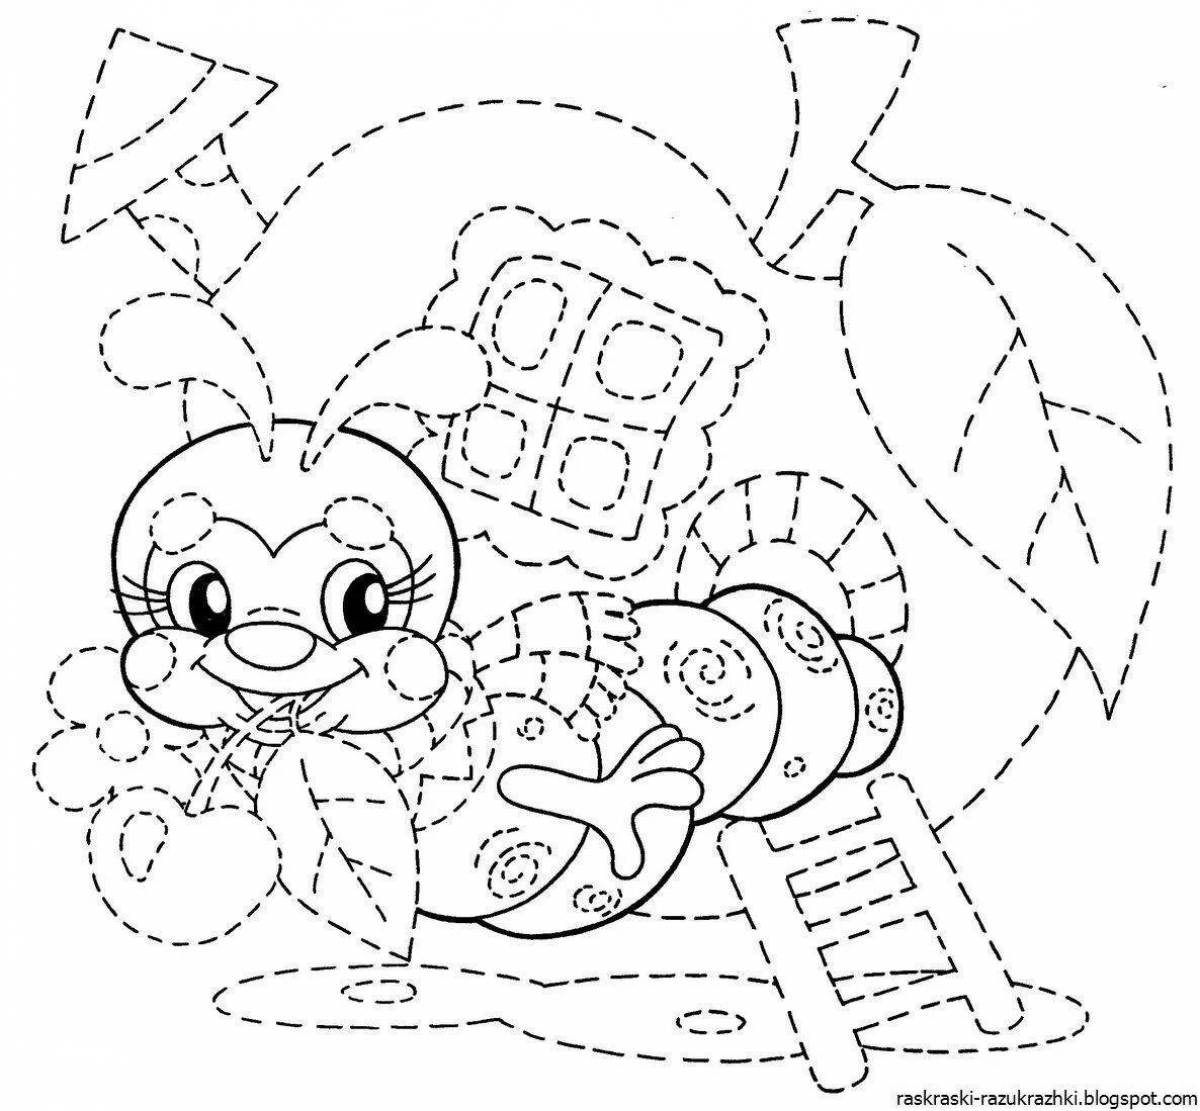 Great copy of the coloring page